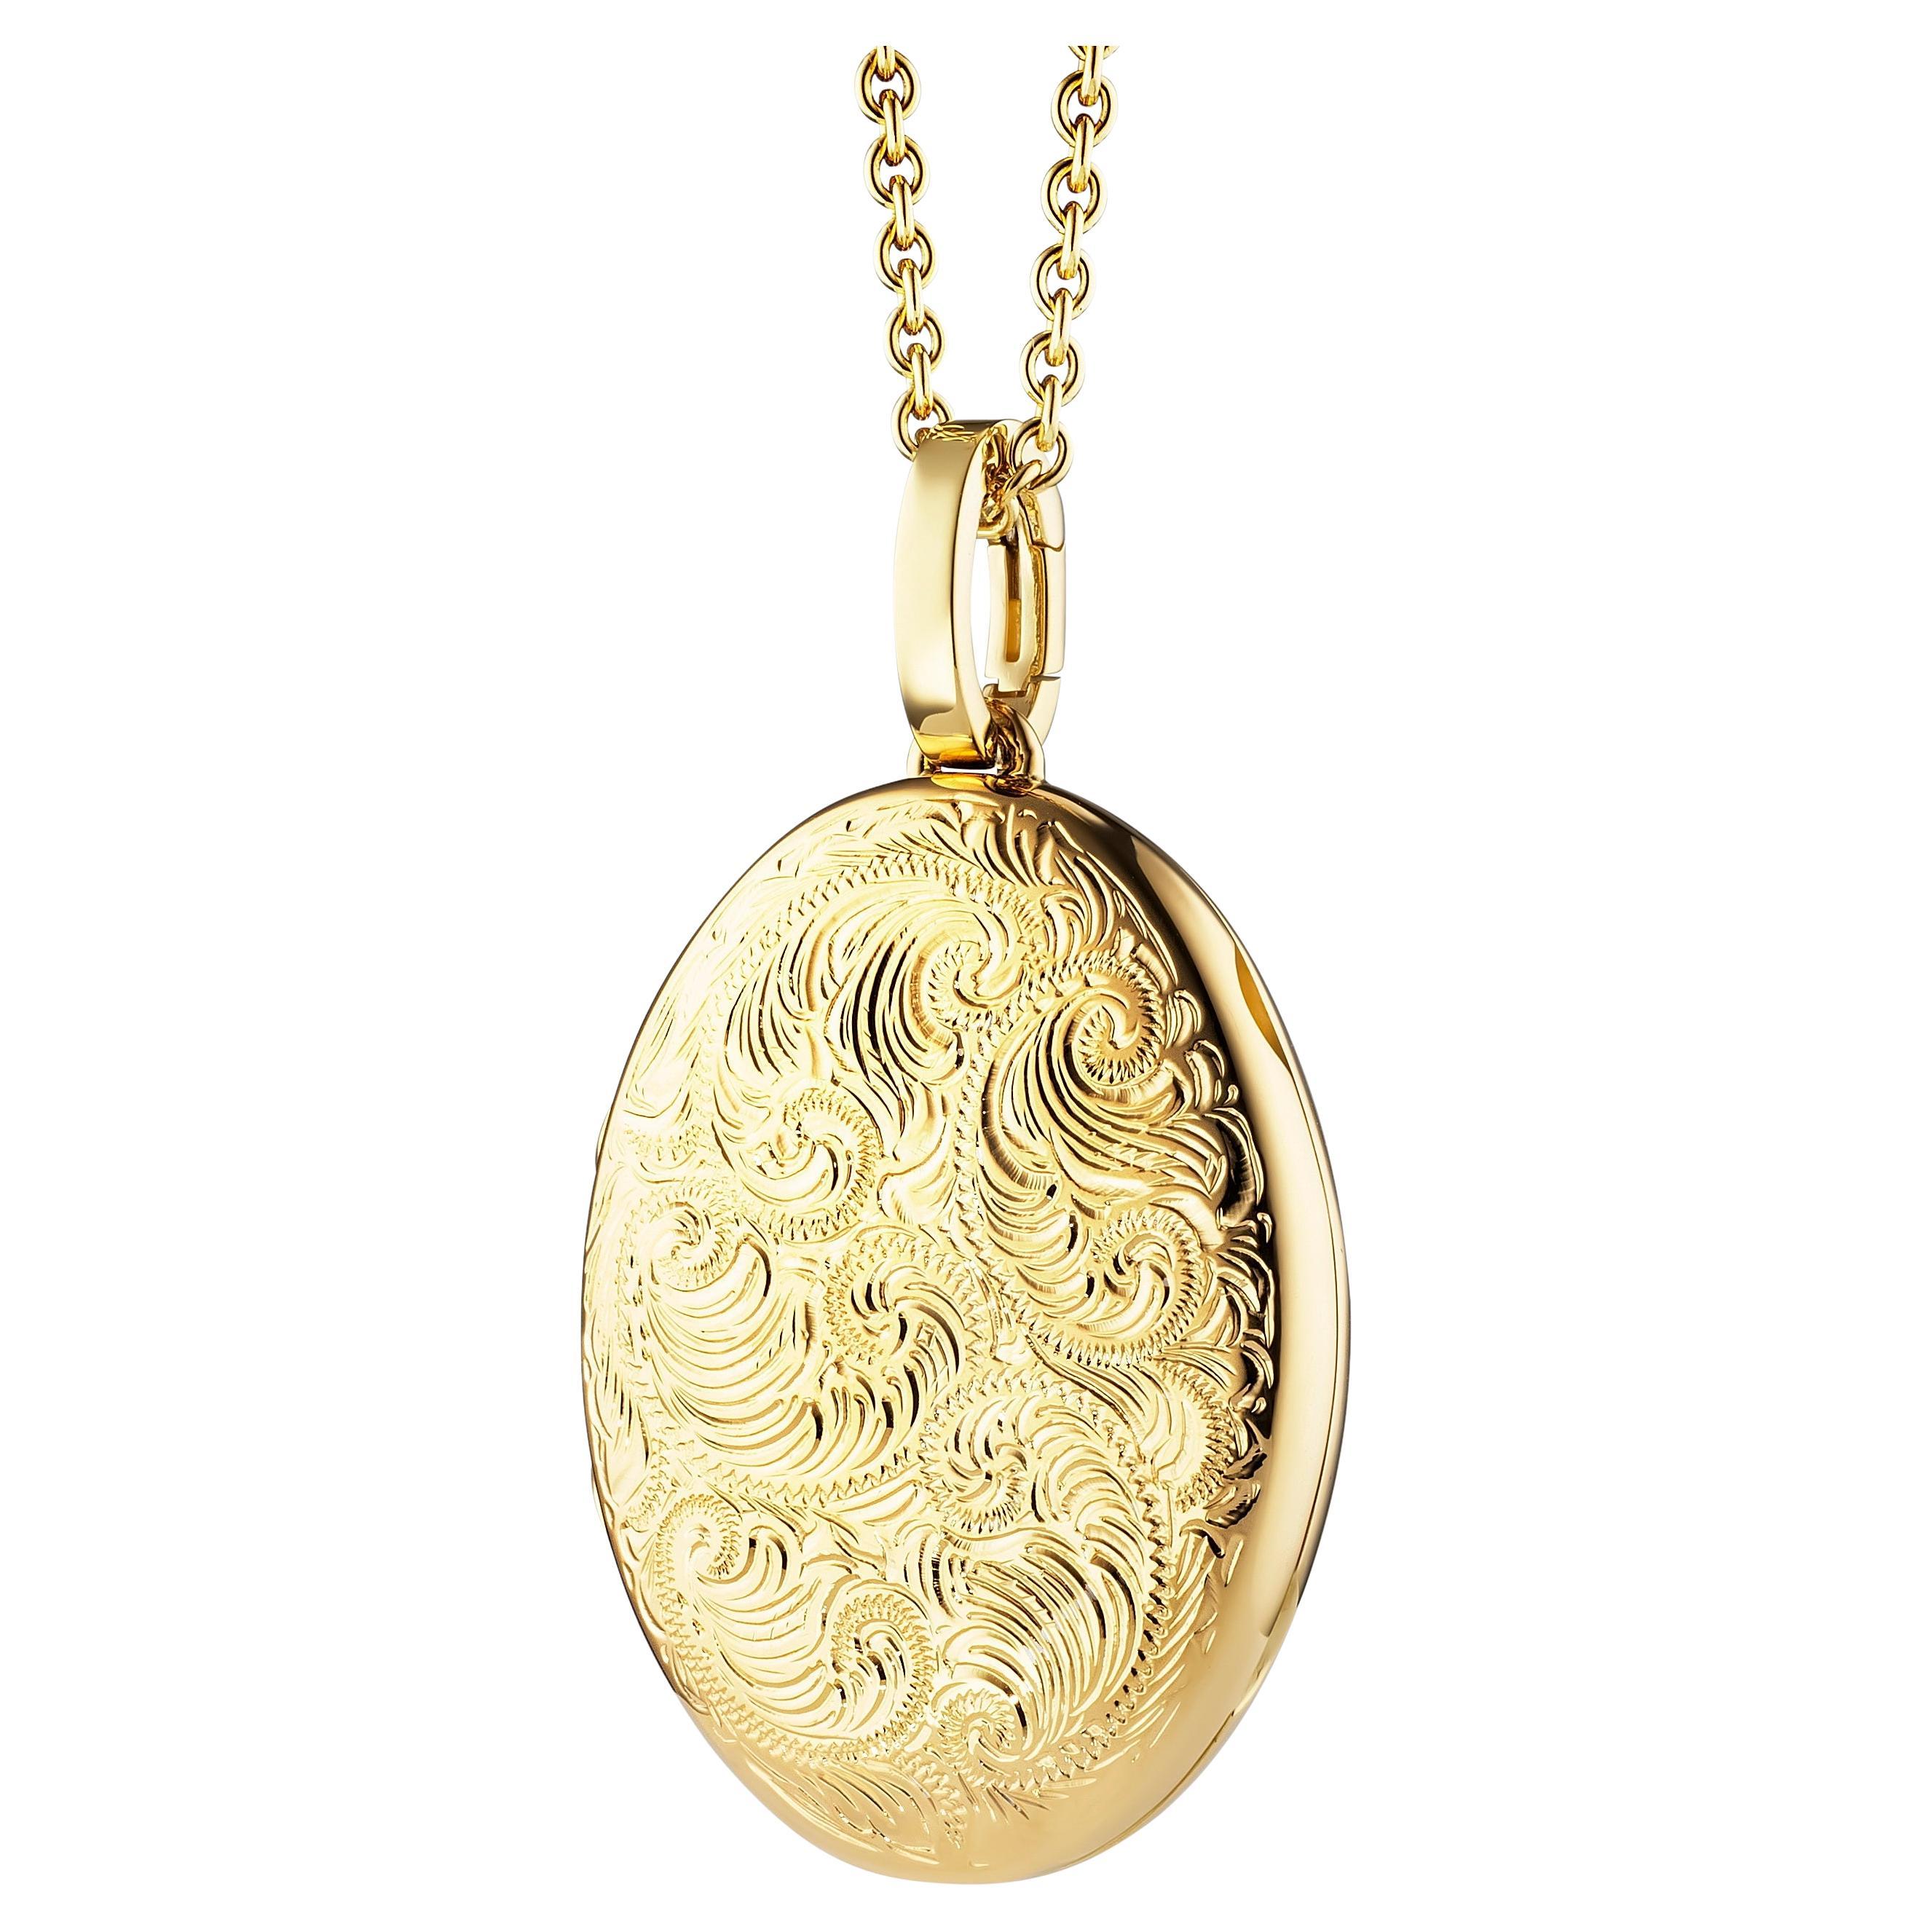 Oval Locket Pendant with Scroll Engraving - 18k Yellow Gold - 32.0 x 23.0 mm For Sale